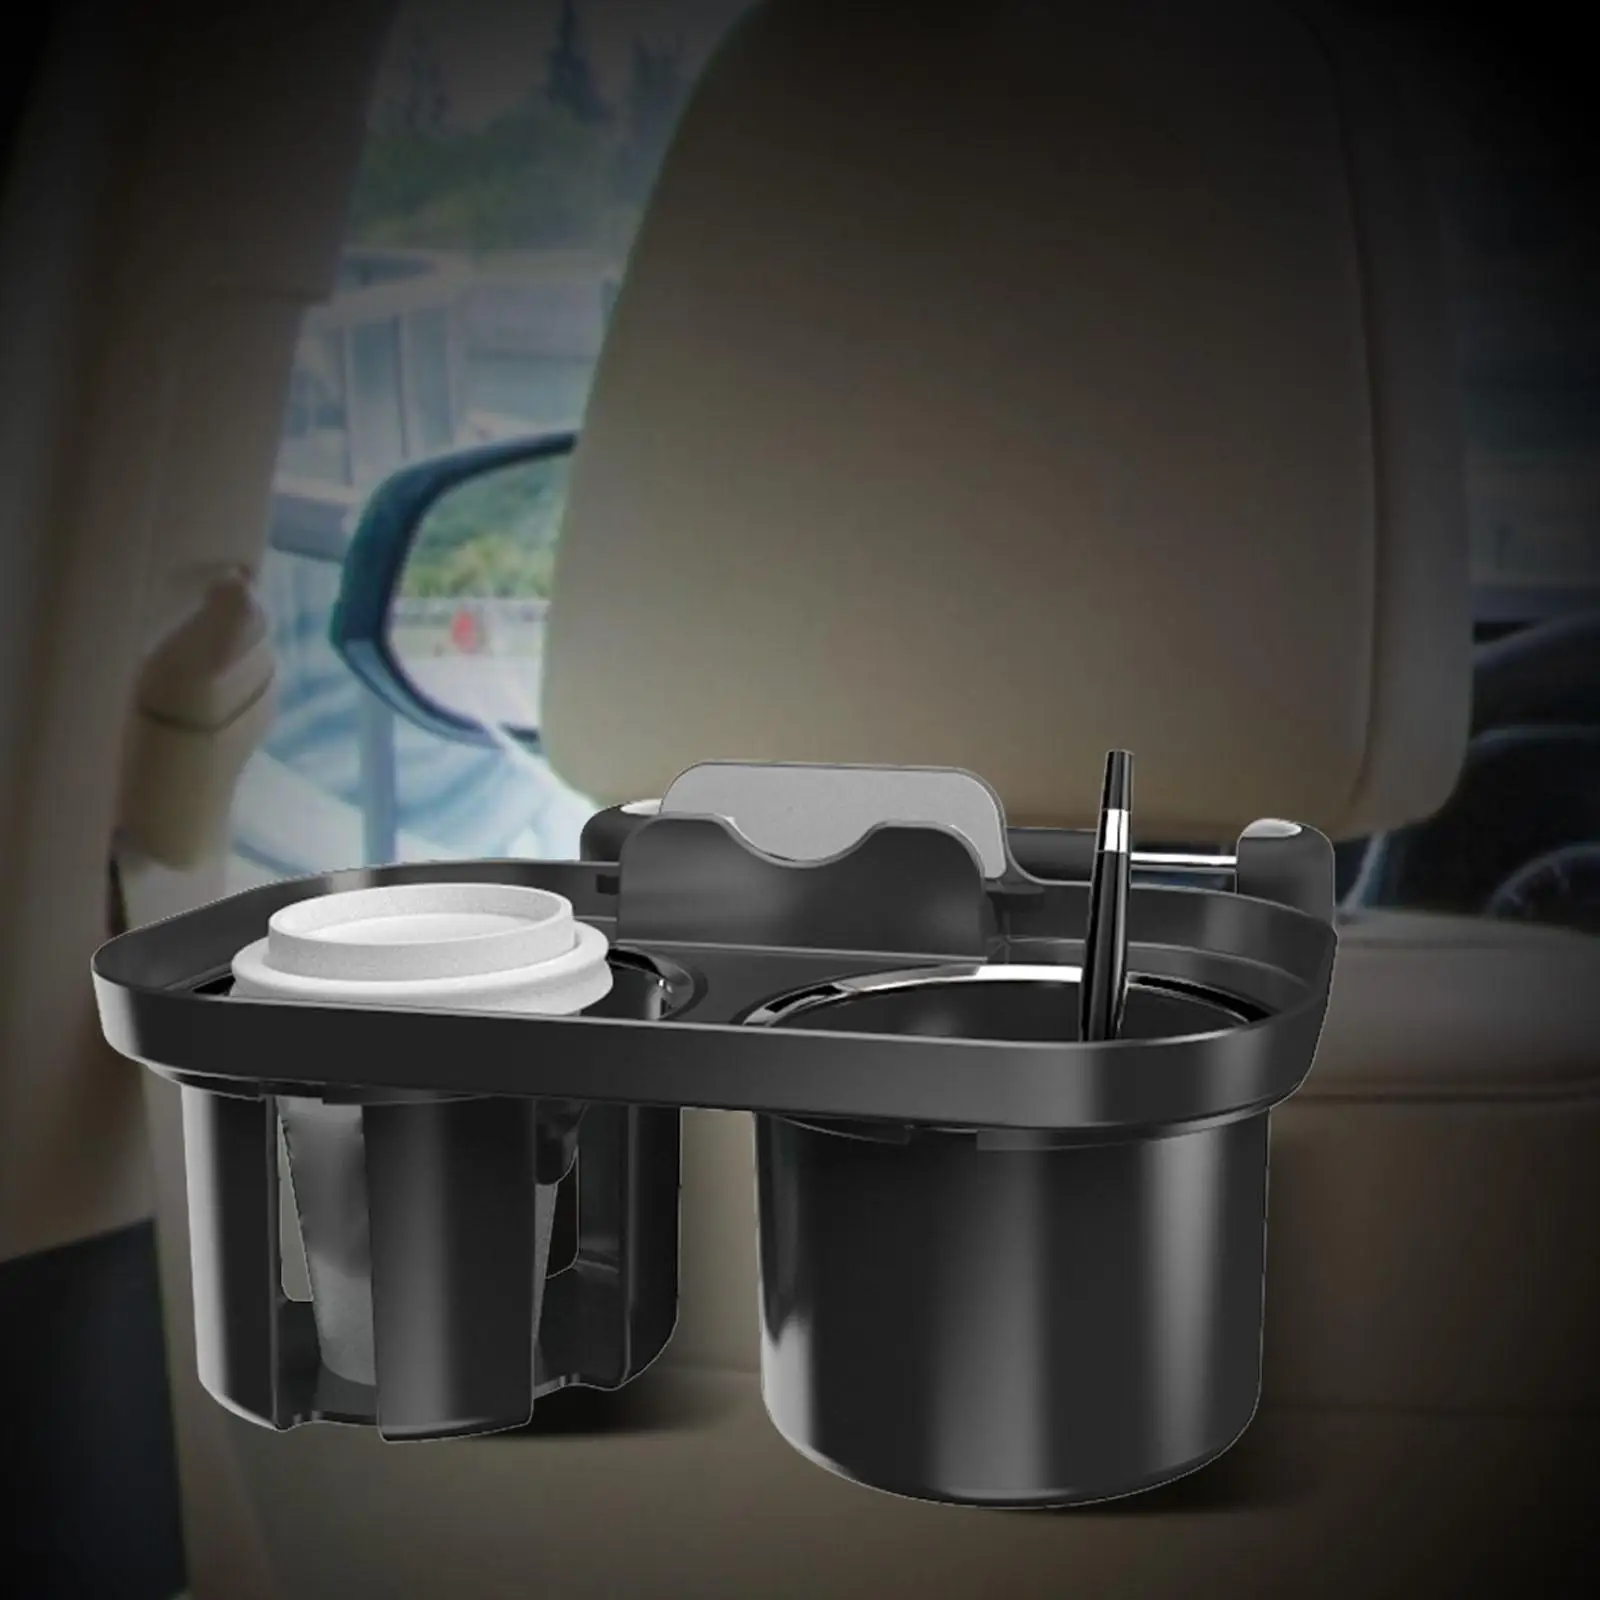 Durable Car Cup Holder with Phone Mount Automotive Interior Accessories Food Tray Drink Pocket for Bottle Beverage Travel